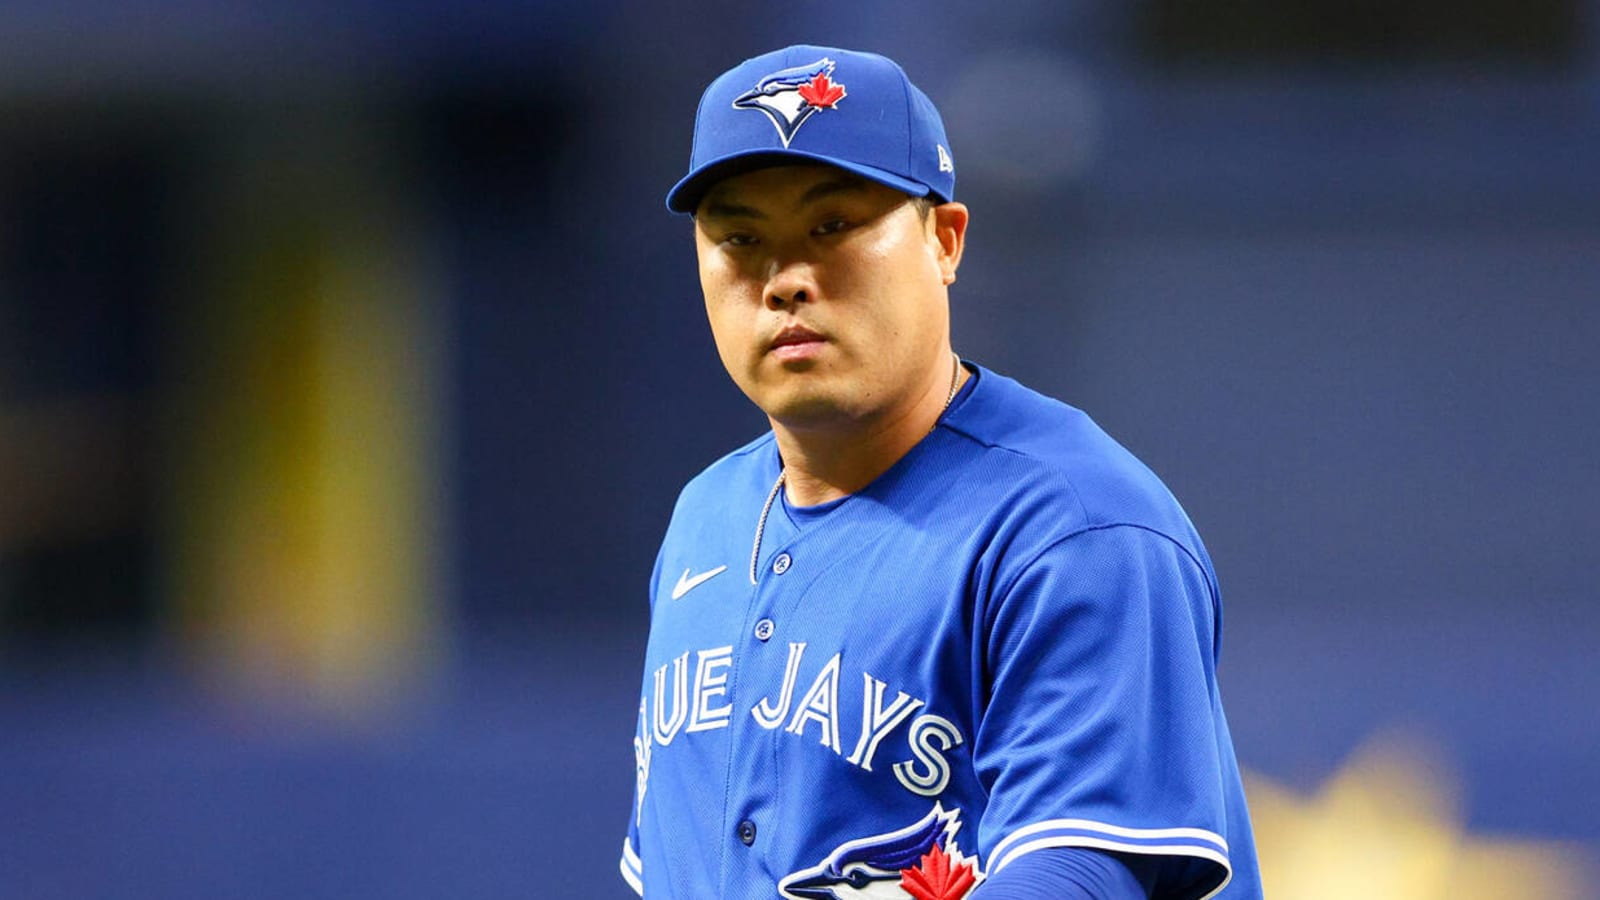 Blue Jays ace (and joker) Hyun-Jin Ryu makes himself at home in 'incredibly  clean' Toronto